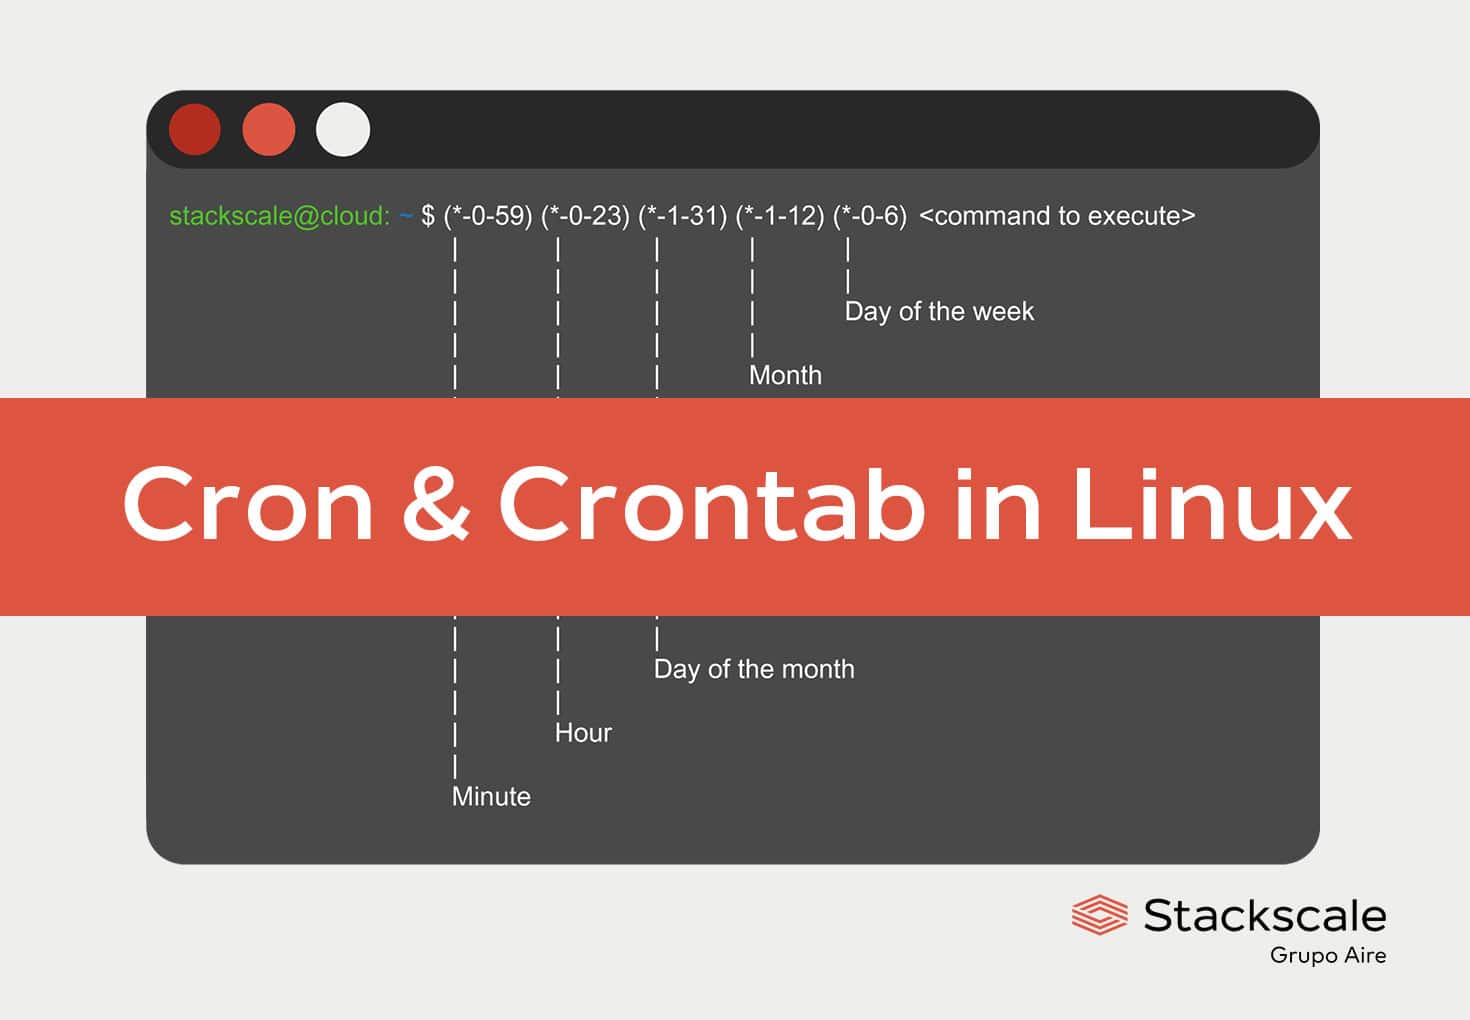 Scheduling tasks with cron and crontab in Linux